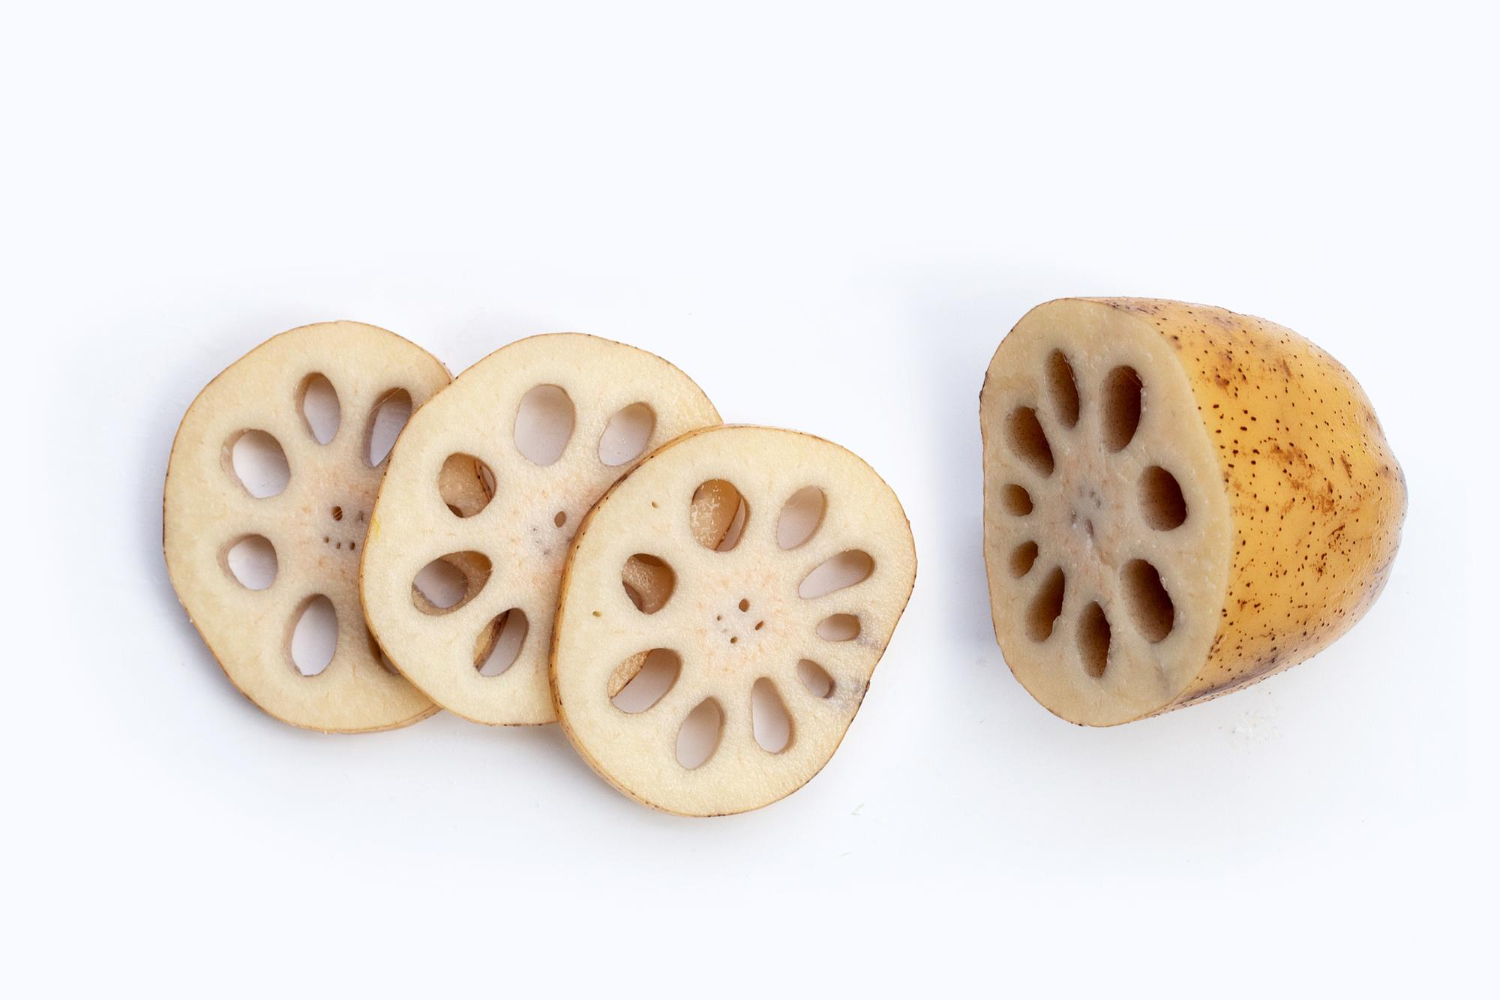 Lotus root: Nutrition, Health Benefits, and Culinary Tips